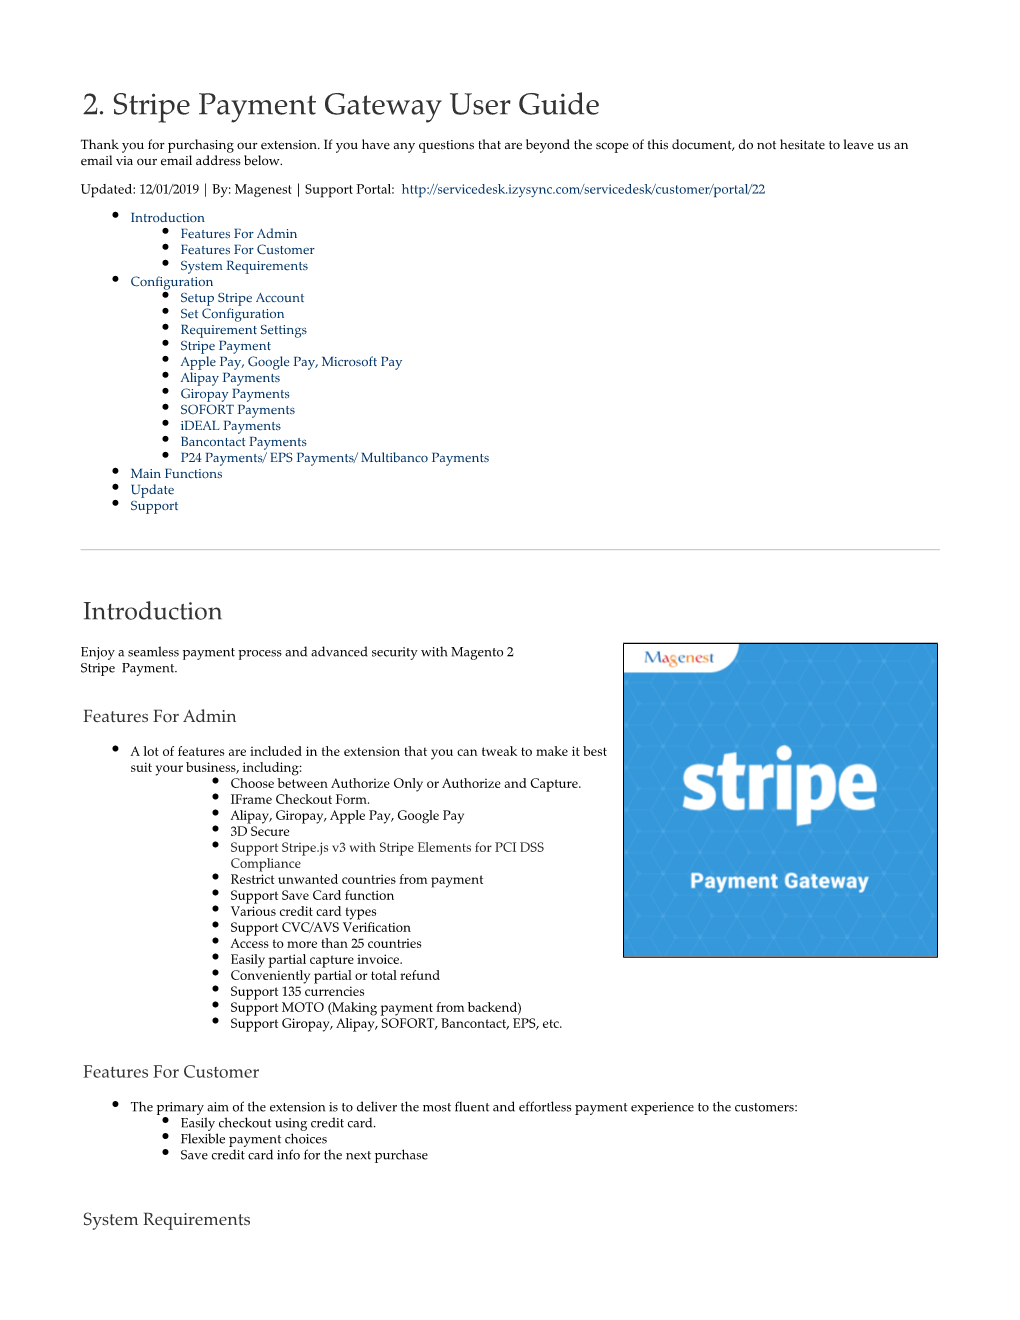 2. Stripe Payment Gateway User Guide